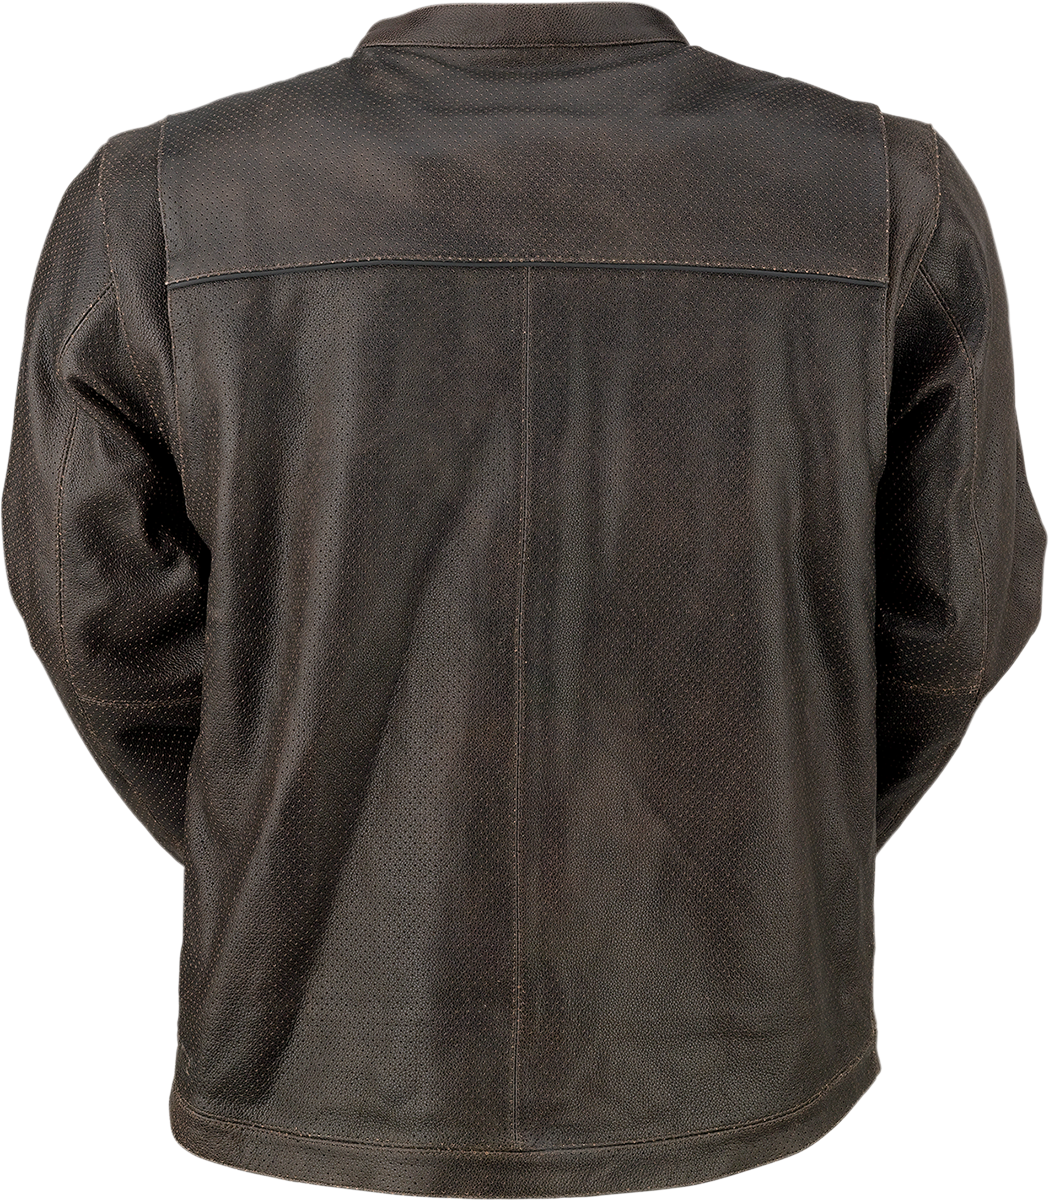 Z1R Munition Perforated Leather Jacket - Brown - XL 2810-3807